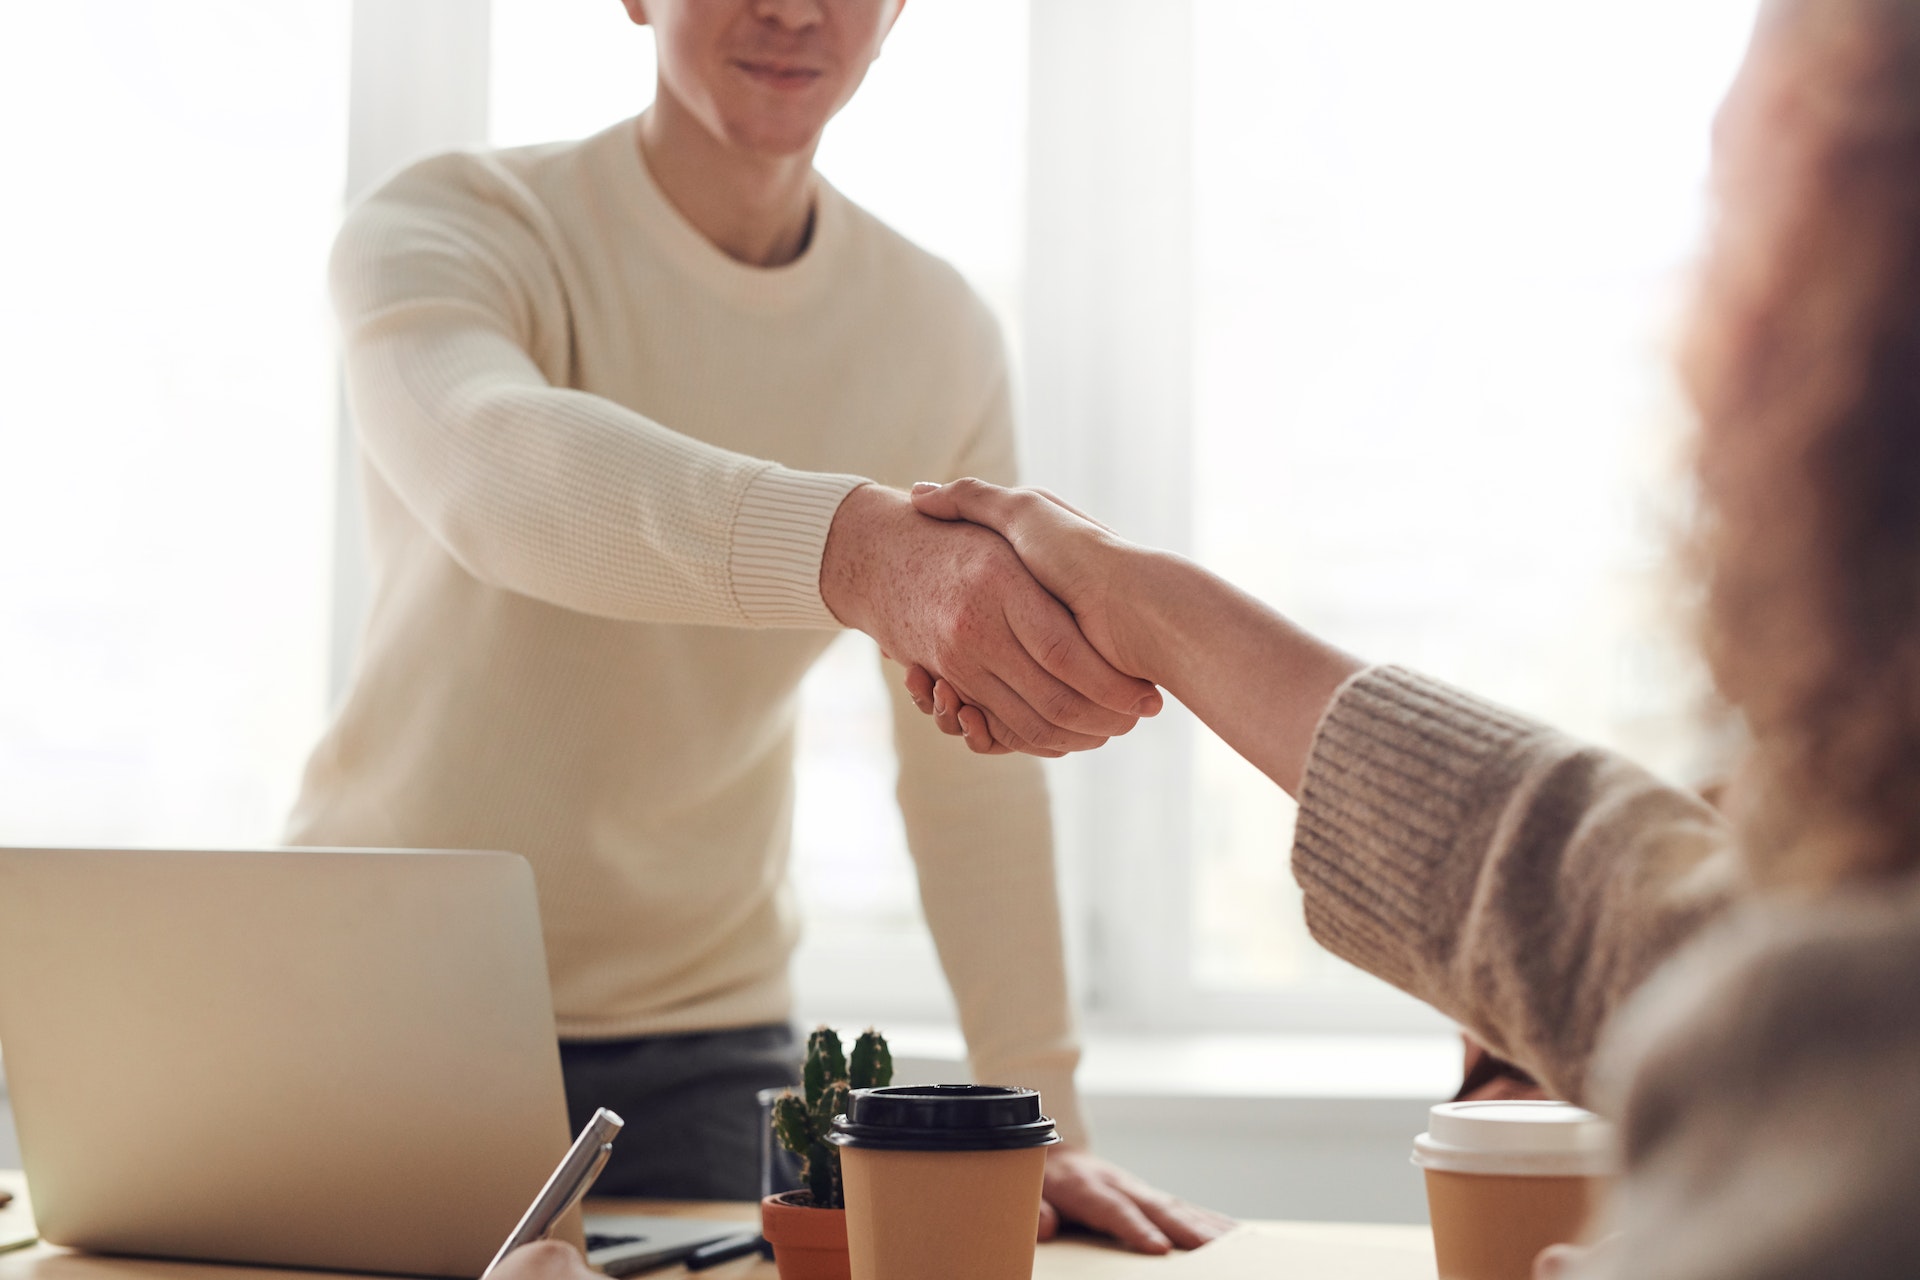 Man shakes hand of job applicant over desk